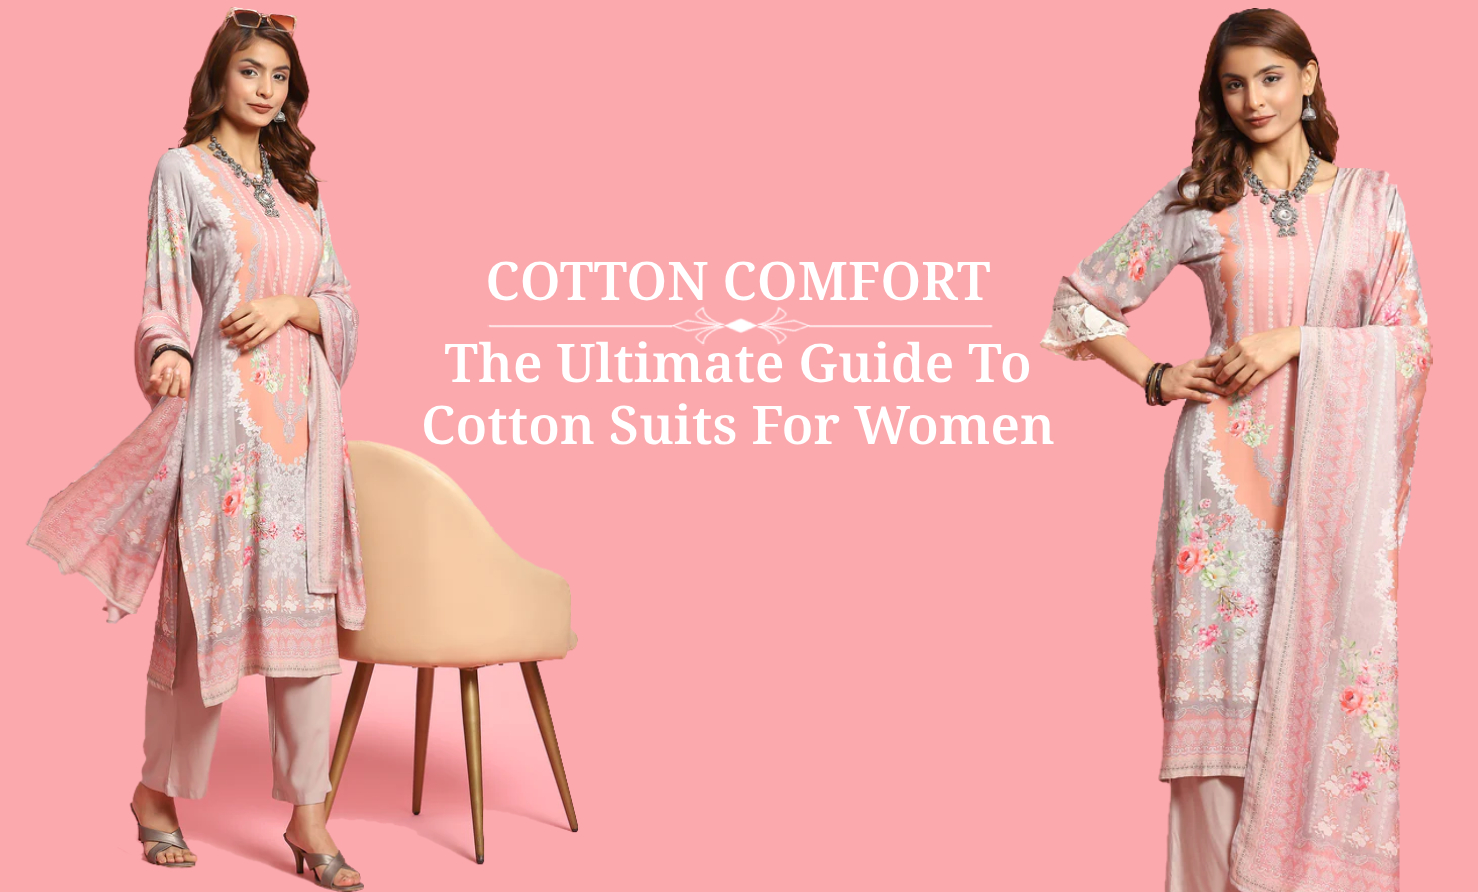 Cotton Comfort: The Ultimate Guide To Cotton Suits For Women